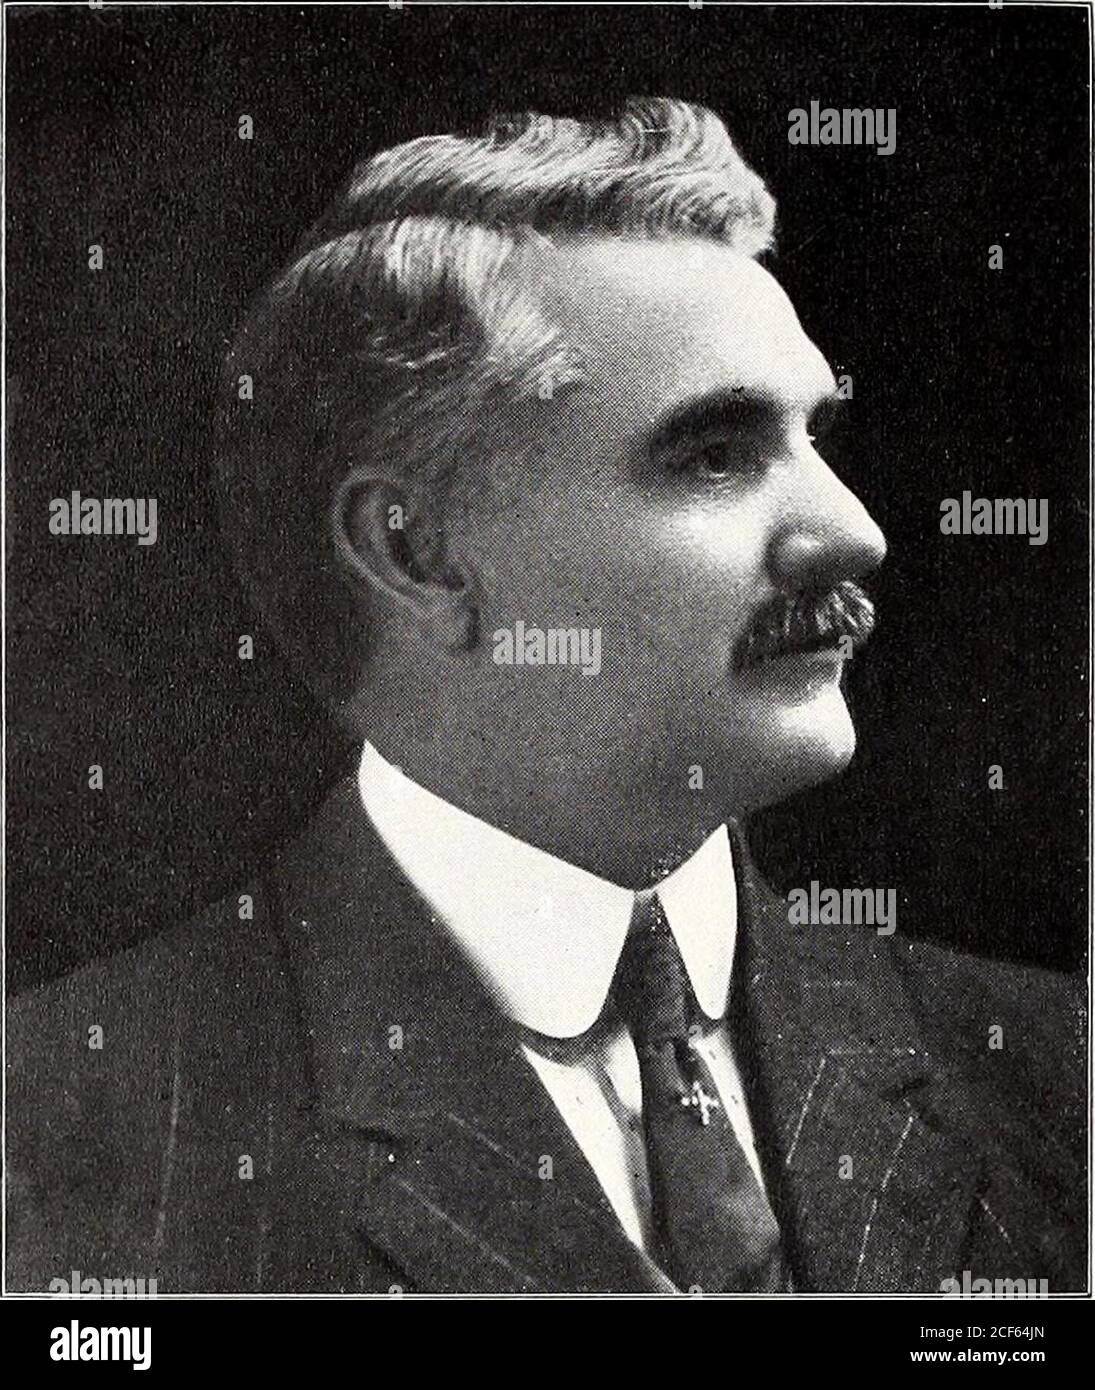 . Notable men of Illinois & their state. Co.; cameto Chicago, Jan., 1886; dir. Apr.. 1886, vice-pres., 1893, and pres.1906 (resigned 1909); in June, 1910, became pres. and treas. Dolese& Shepard Co.; mem. Mavflower Soc, Soc. of Colonial Wars,Sons of Revolution; Mason, clubs. Union League. C. A. A., SouthShore. Glen View, Builders: otBce, 108 S. La Salle St. FINLEY, WILLIAM HENRY, civil cngr., Chicago; b. DelawareCity, Del., Jan. 22, 1862; s. William F. and Mary (McDonough)Finley; ed. pub. schls. Wilmington, Del.; in office DelawareGazette, 1878-82; service of Edge Moor Iron Co., 1882-7; engrin Stock Photo